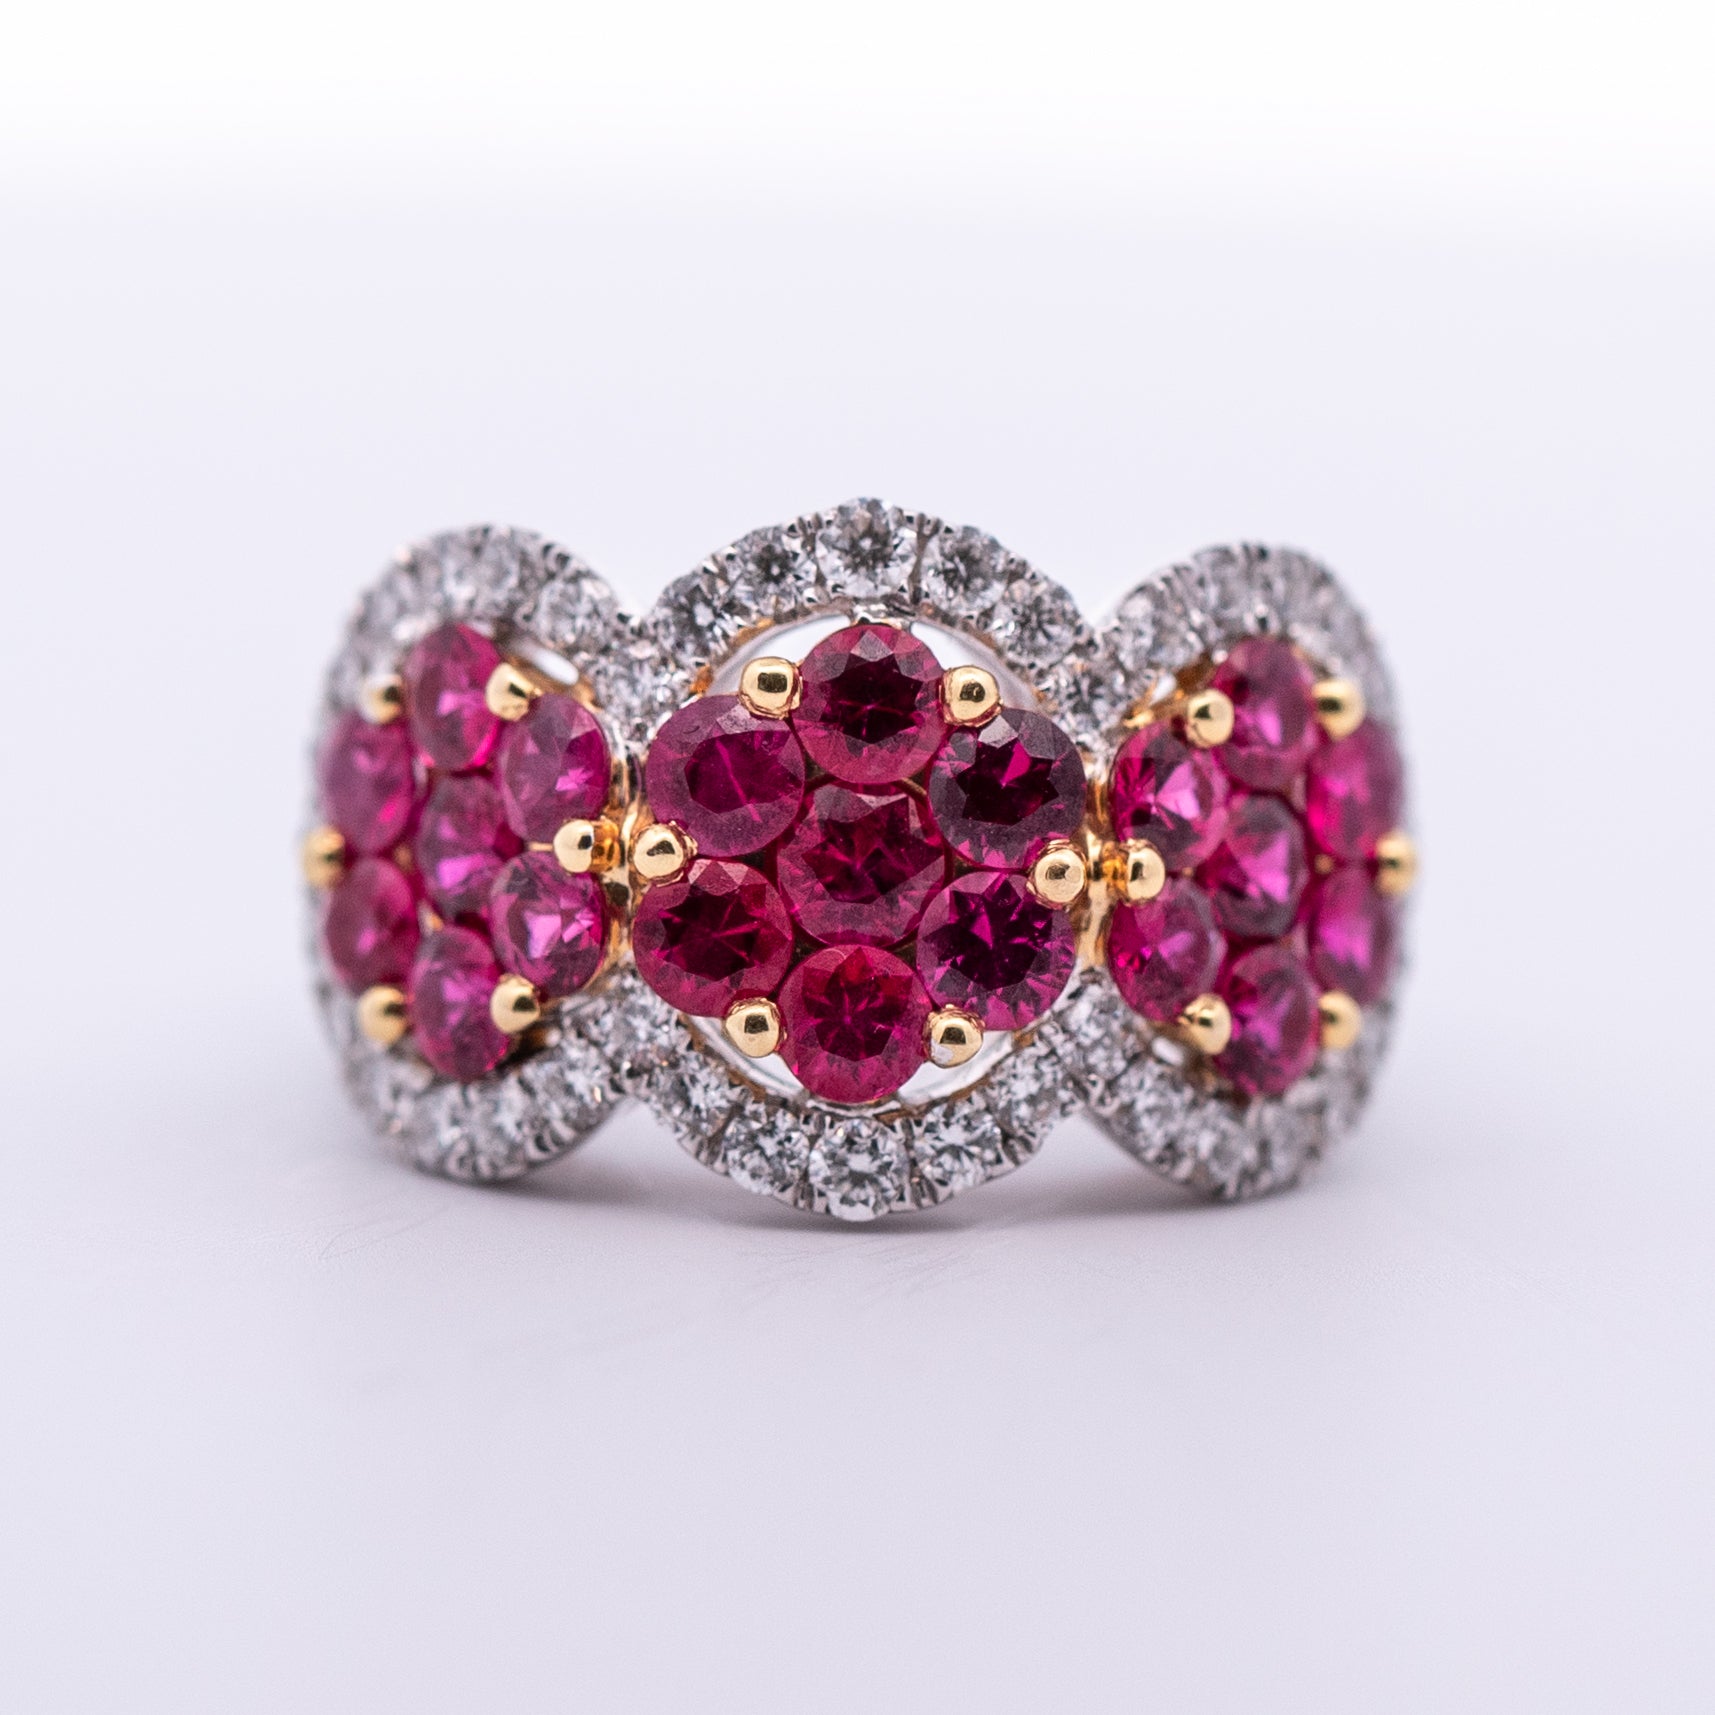 Cluster Rubies Ring - Colored Stone Rings - Womens